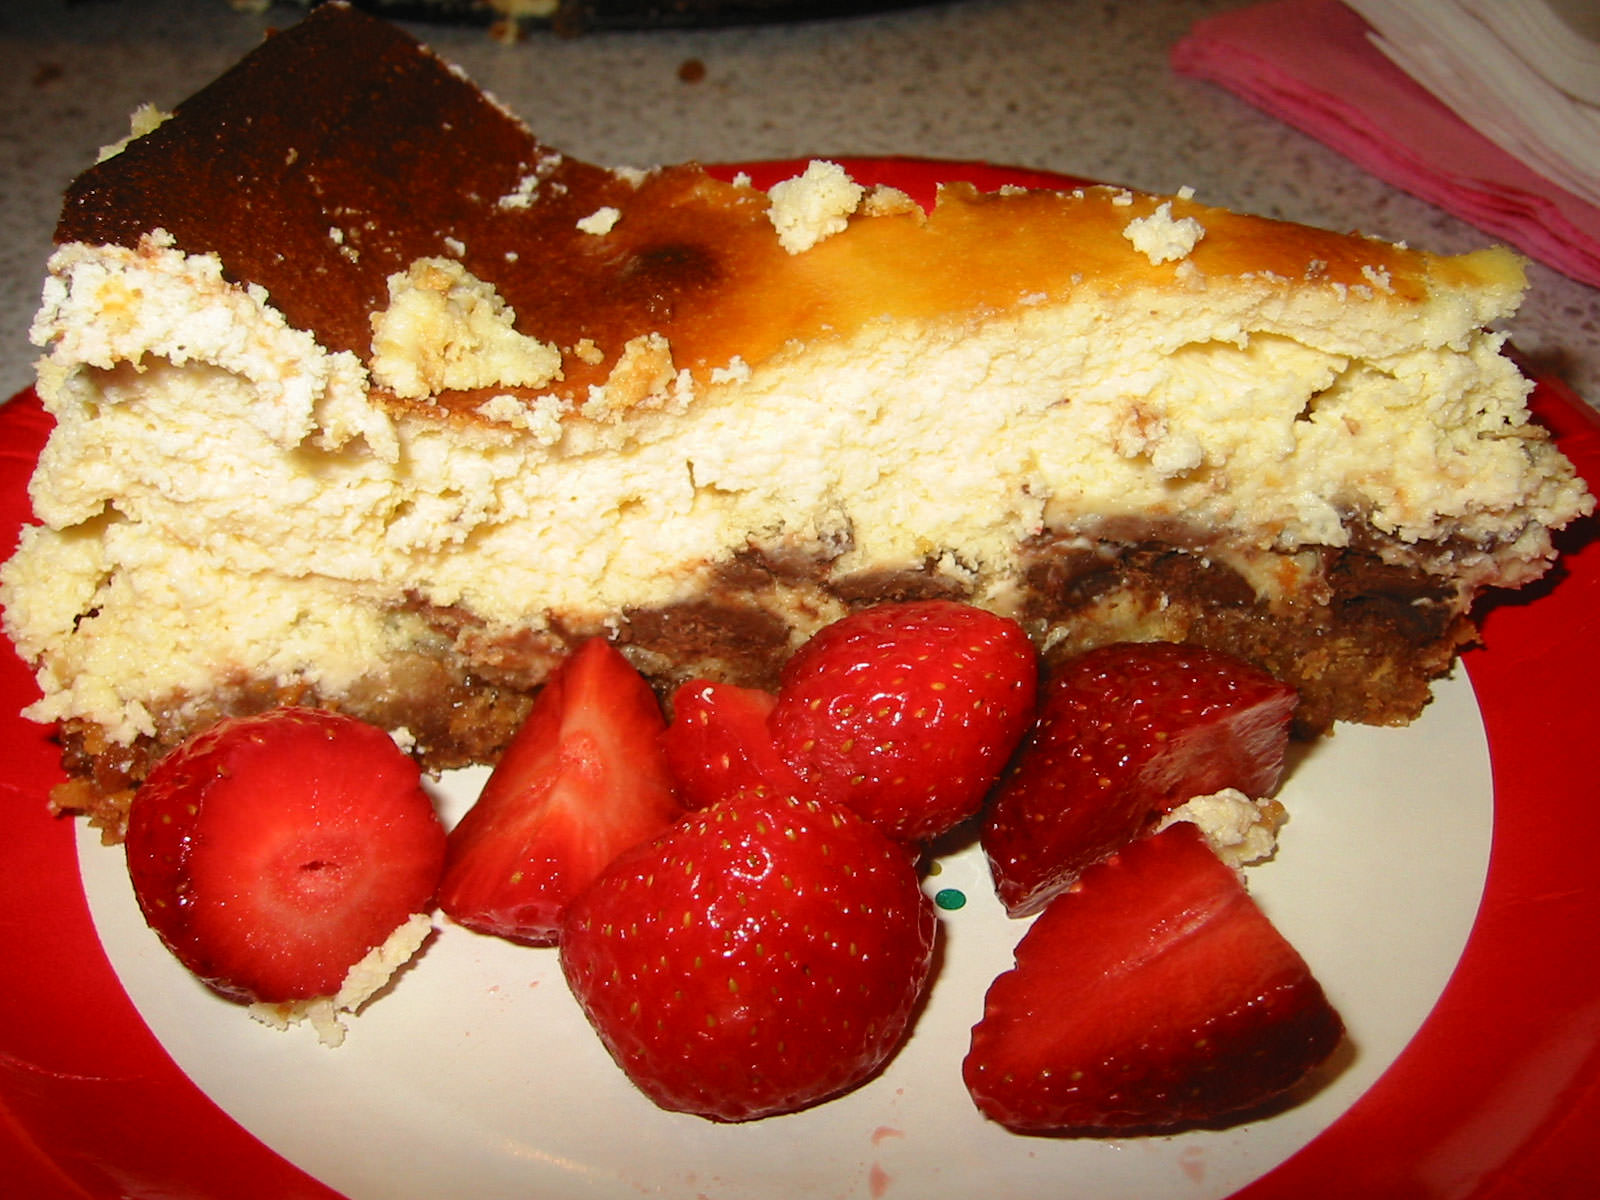 A slice of baked chocolate cheese cake with strawberries